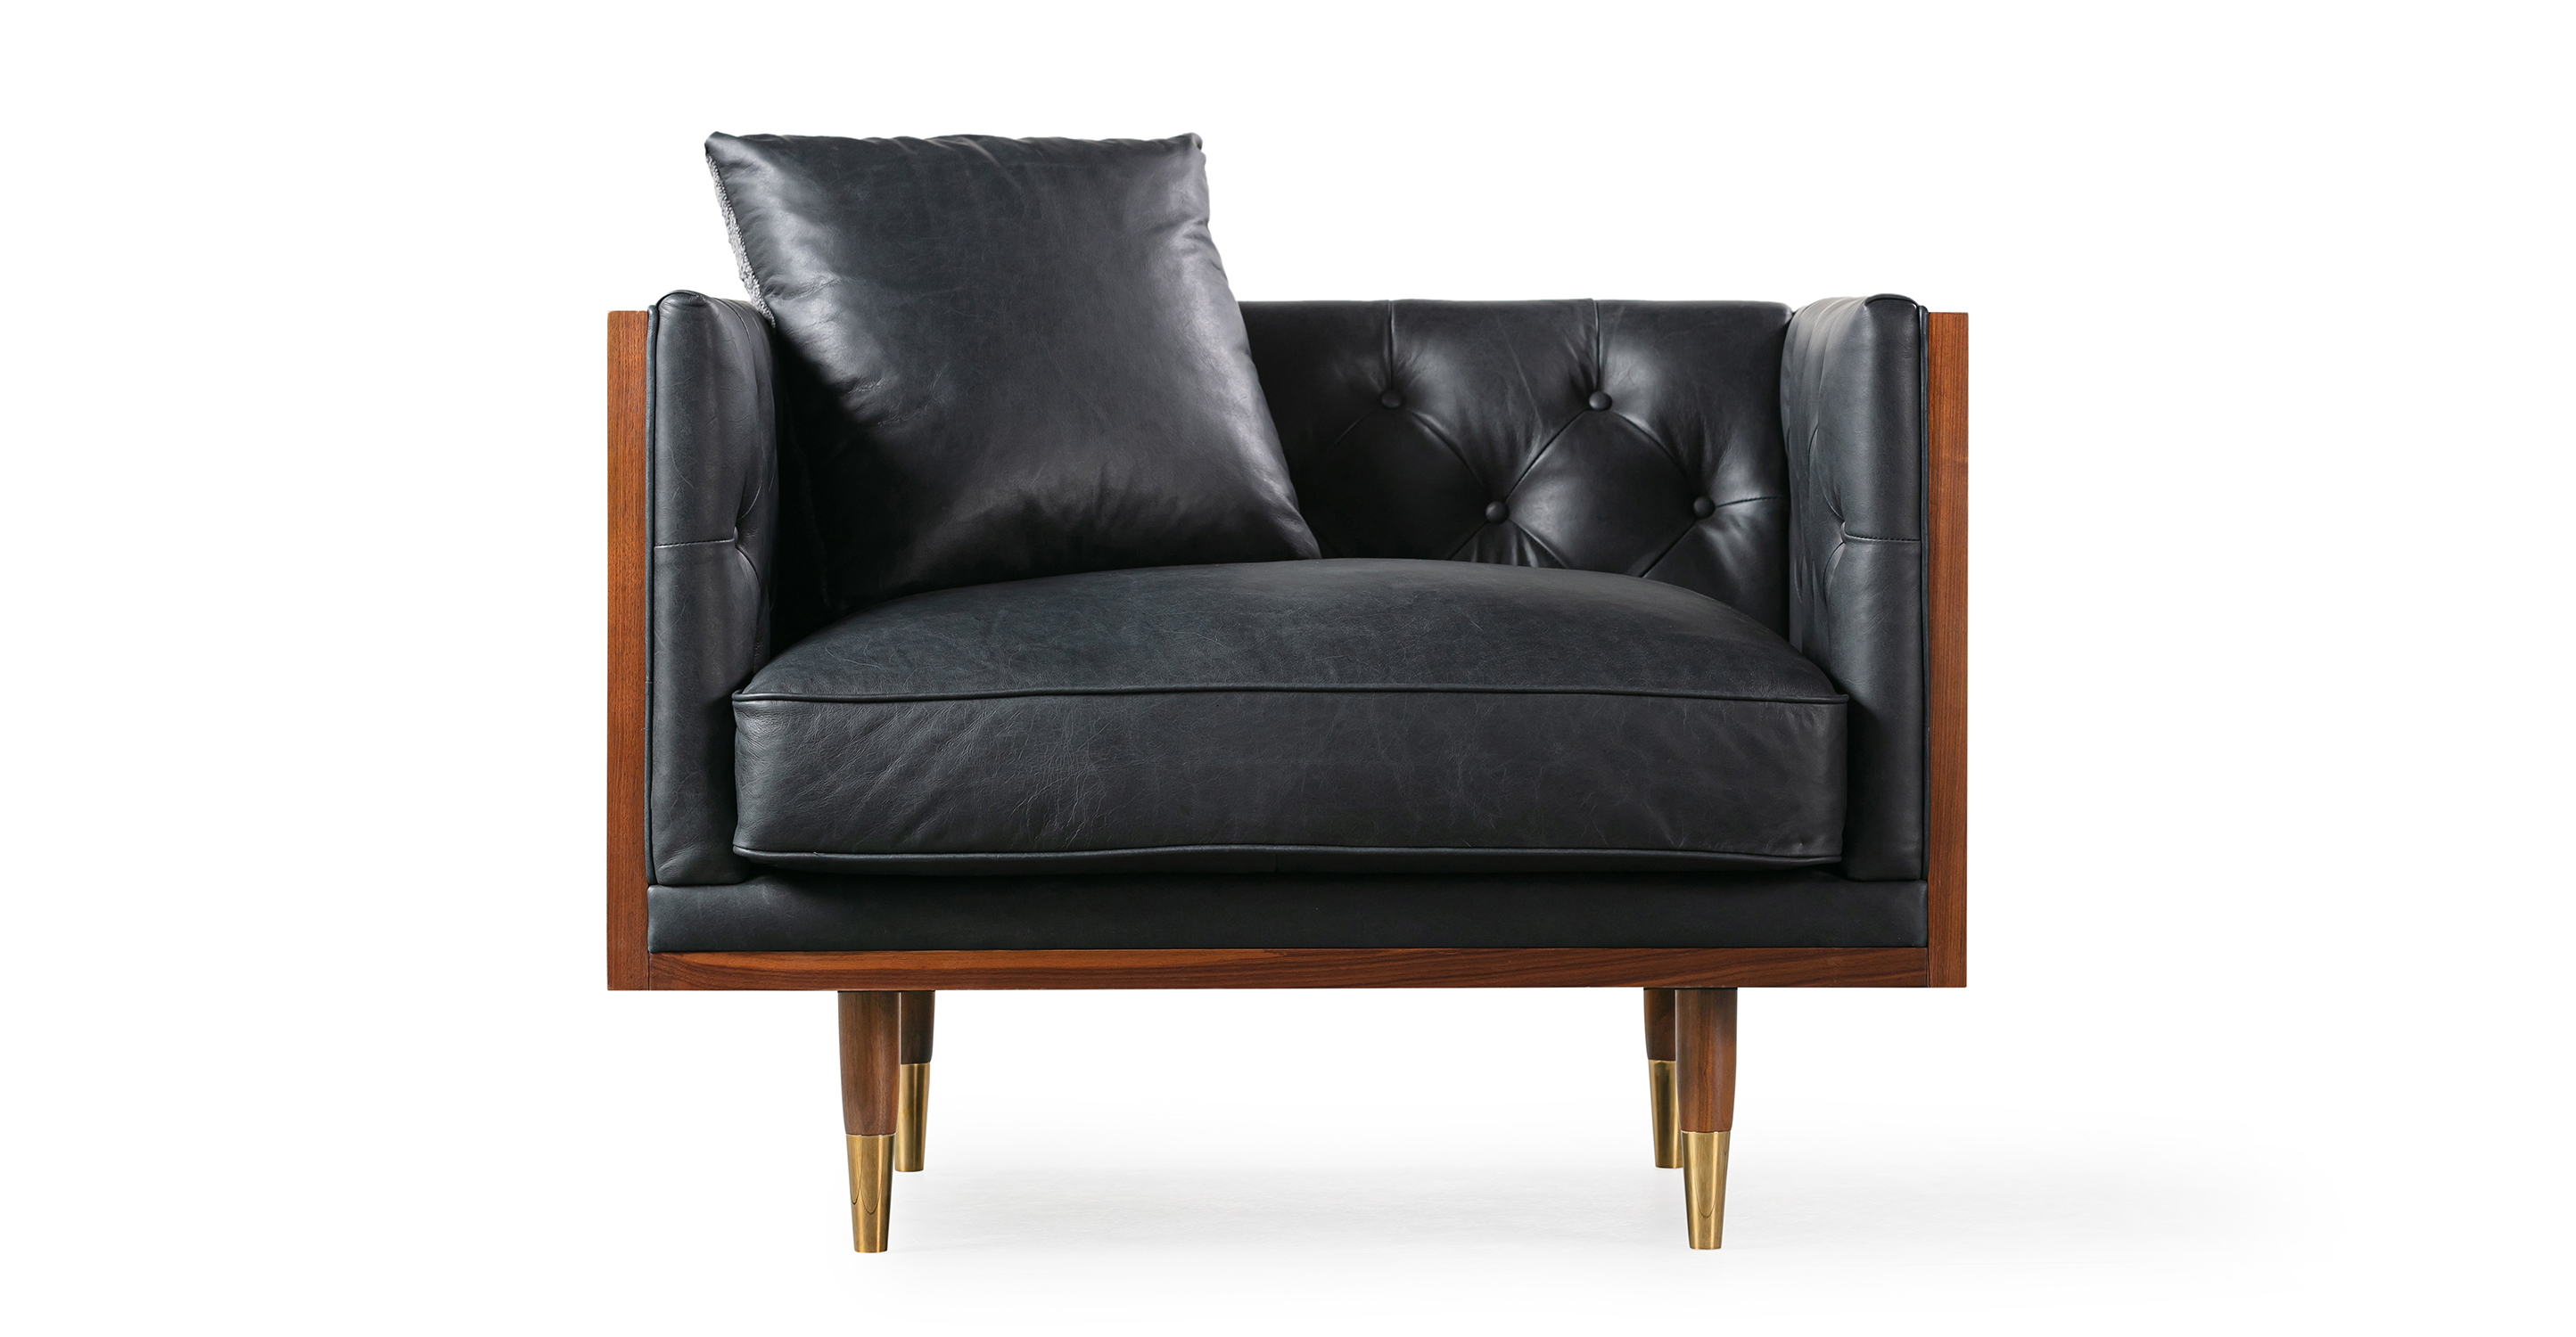 Woodrow Neo Milano Black leather is a walnut wood wrapped chair. The top and of the arms and back are all walnut wood rectangles, creating a box shape. The interior of the chair back and seat are affixed and tufted cushions. There is a matching throw pillow. The seat cushion is smooth and removable. The legs are matching walnut wood, tapered, and brass tipped.